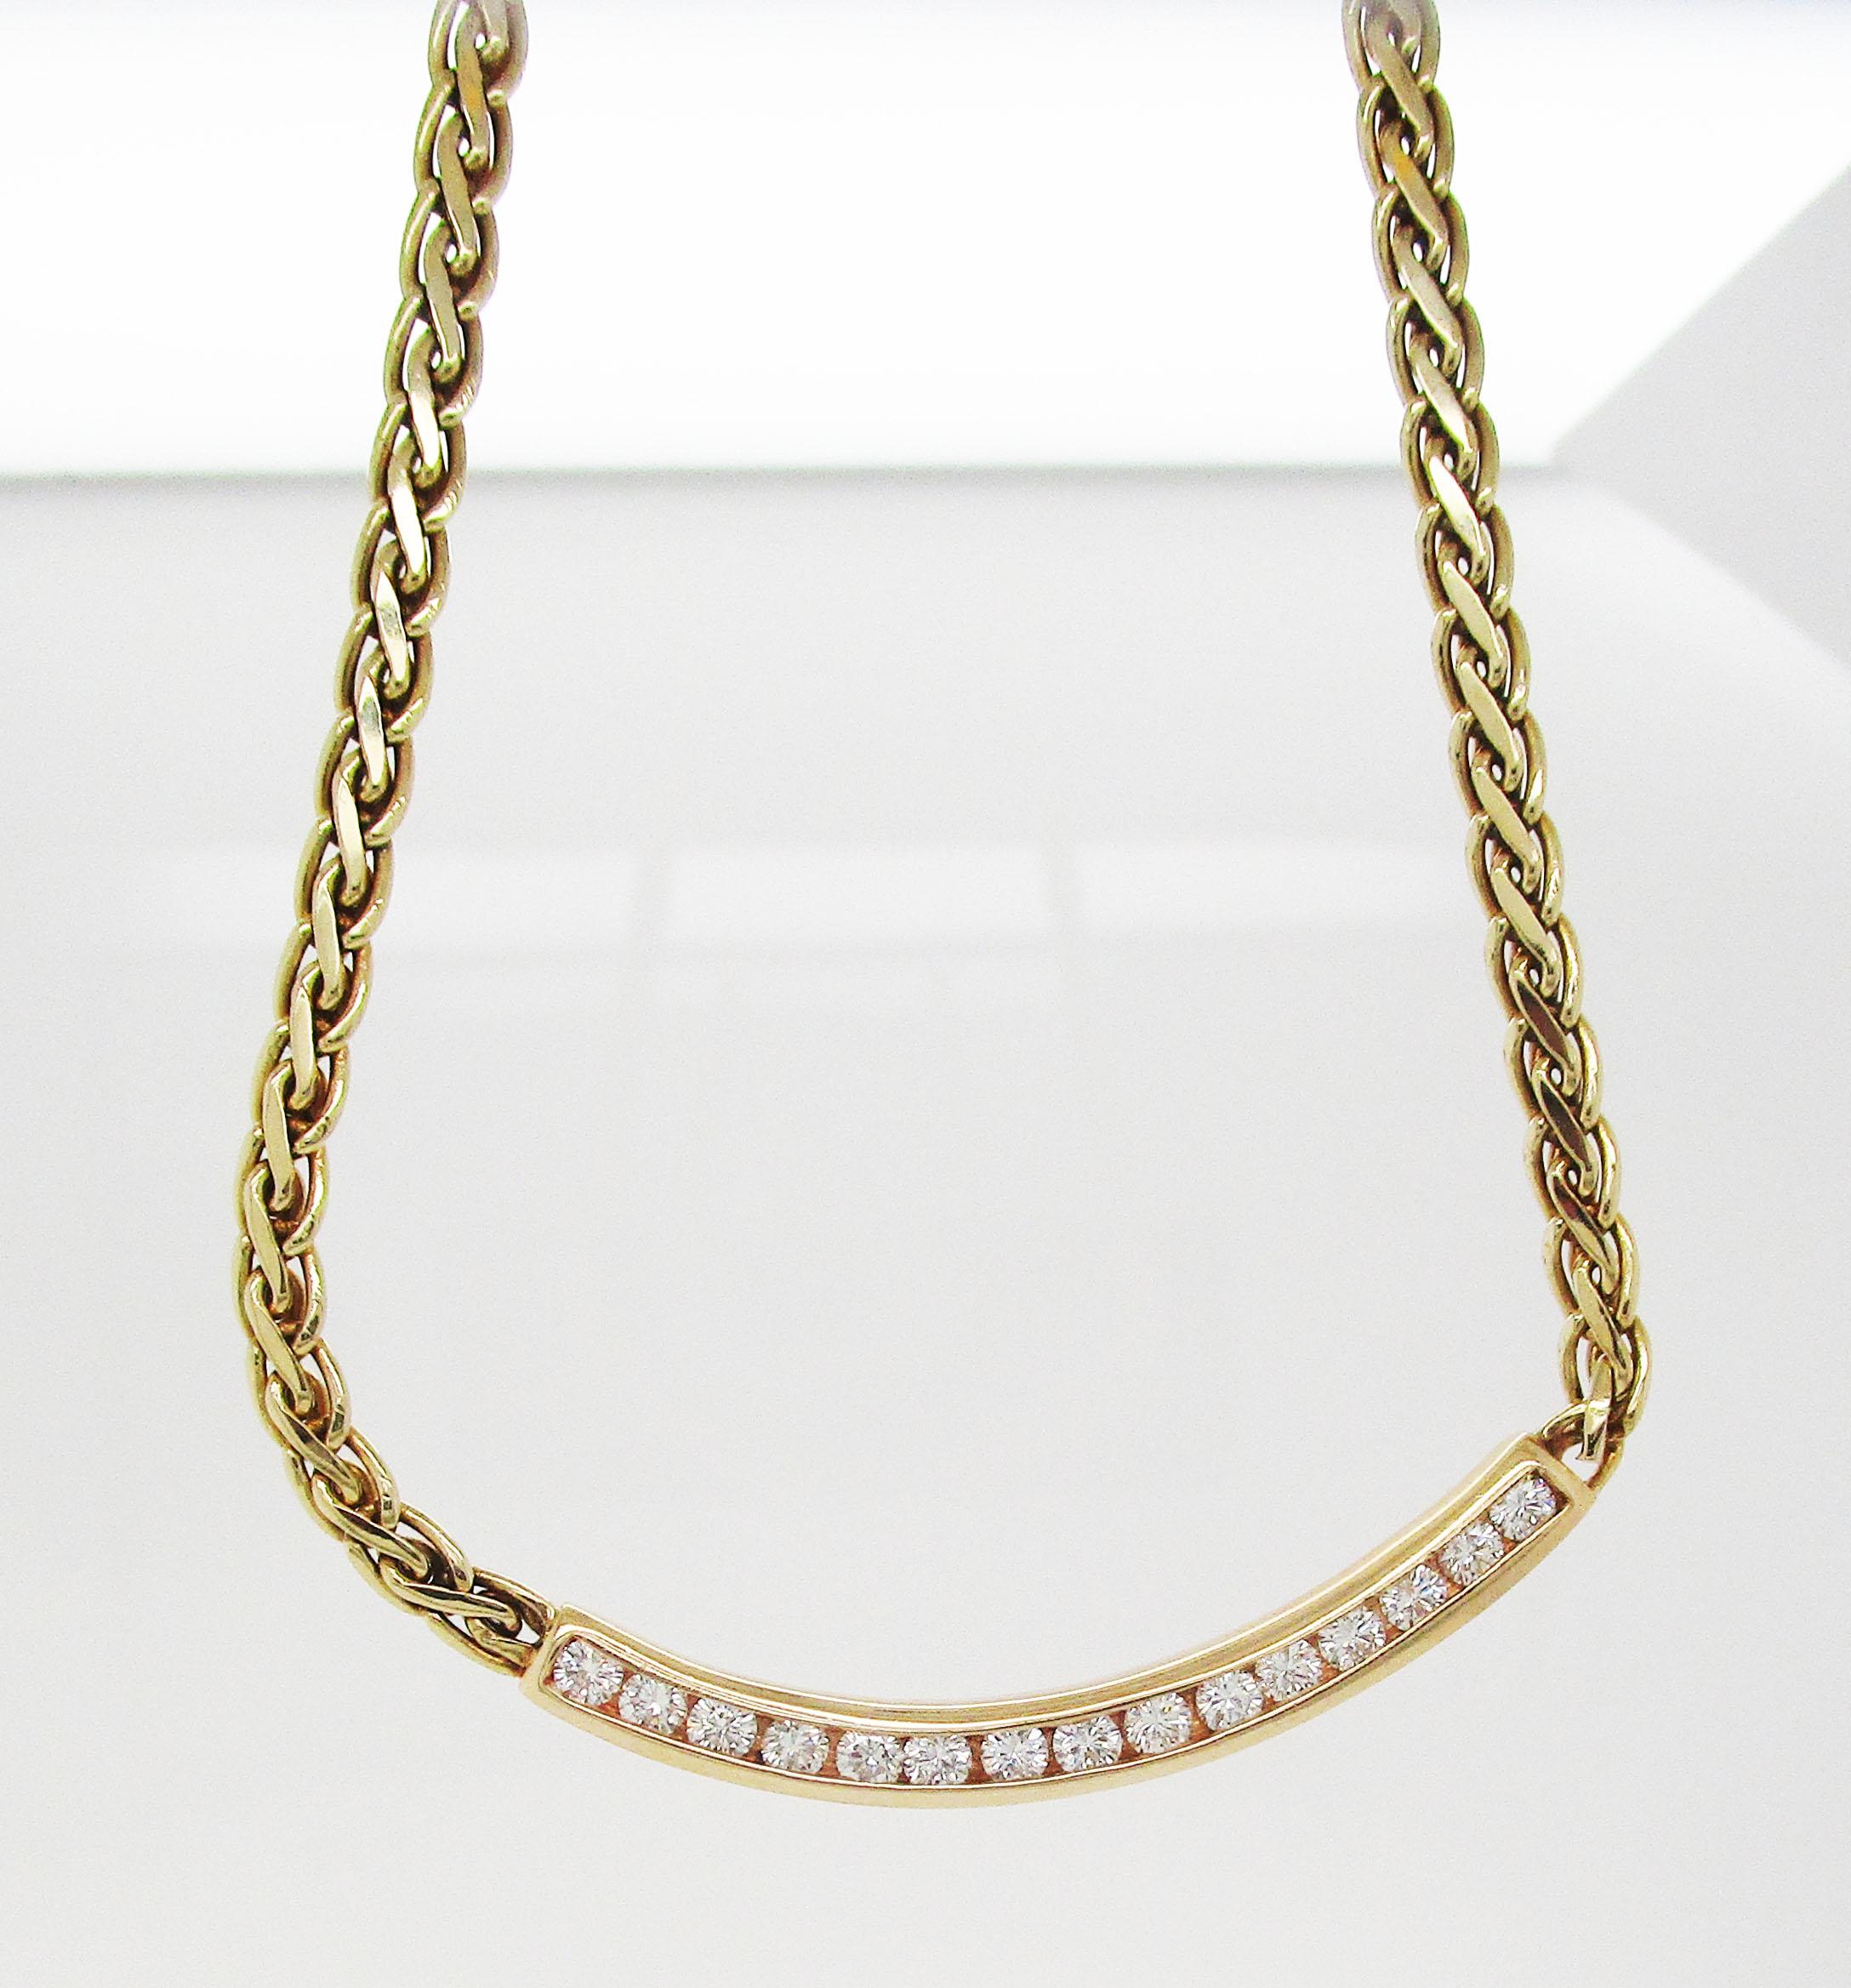 This is a stunning vintage necklace in 14k yellow gold featuring a fantastic curved center bar channel set with 15 gorgeous diamonds! The diamonds are absolutely brilliant and truly sparkle set against the yellow gold! This is an effortlessly